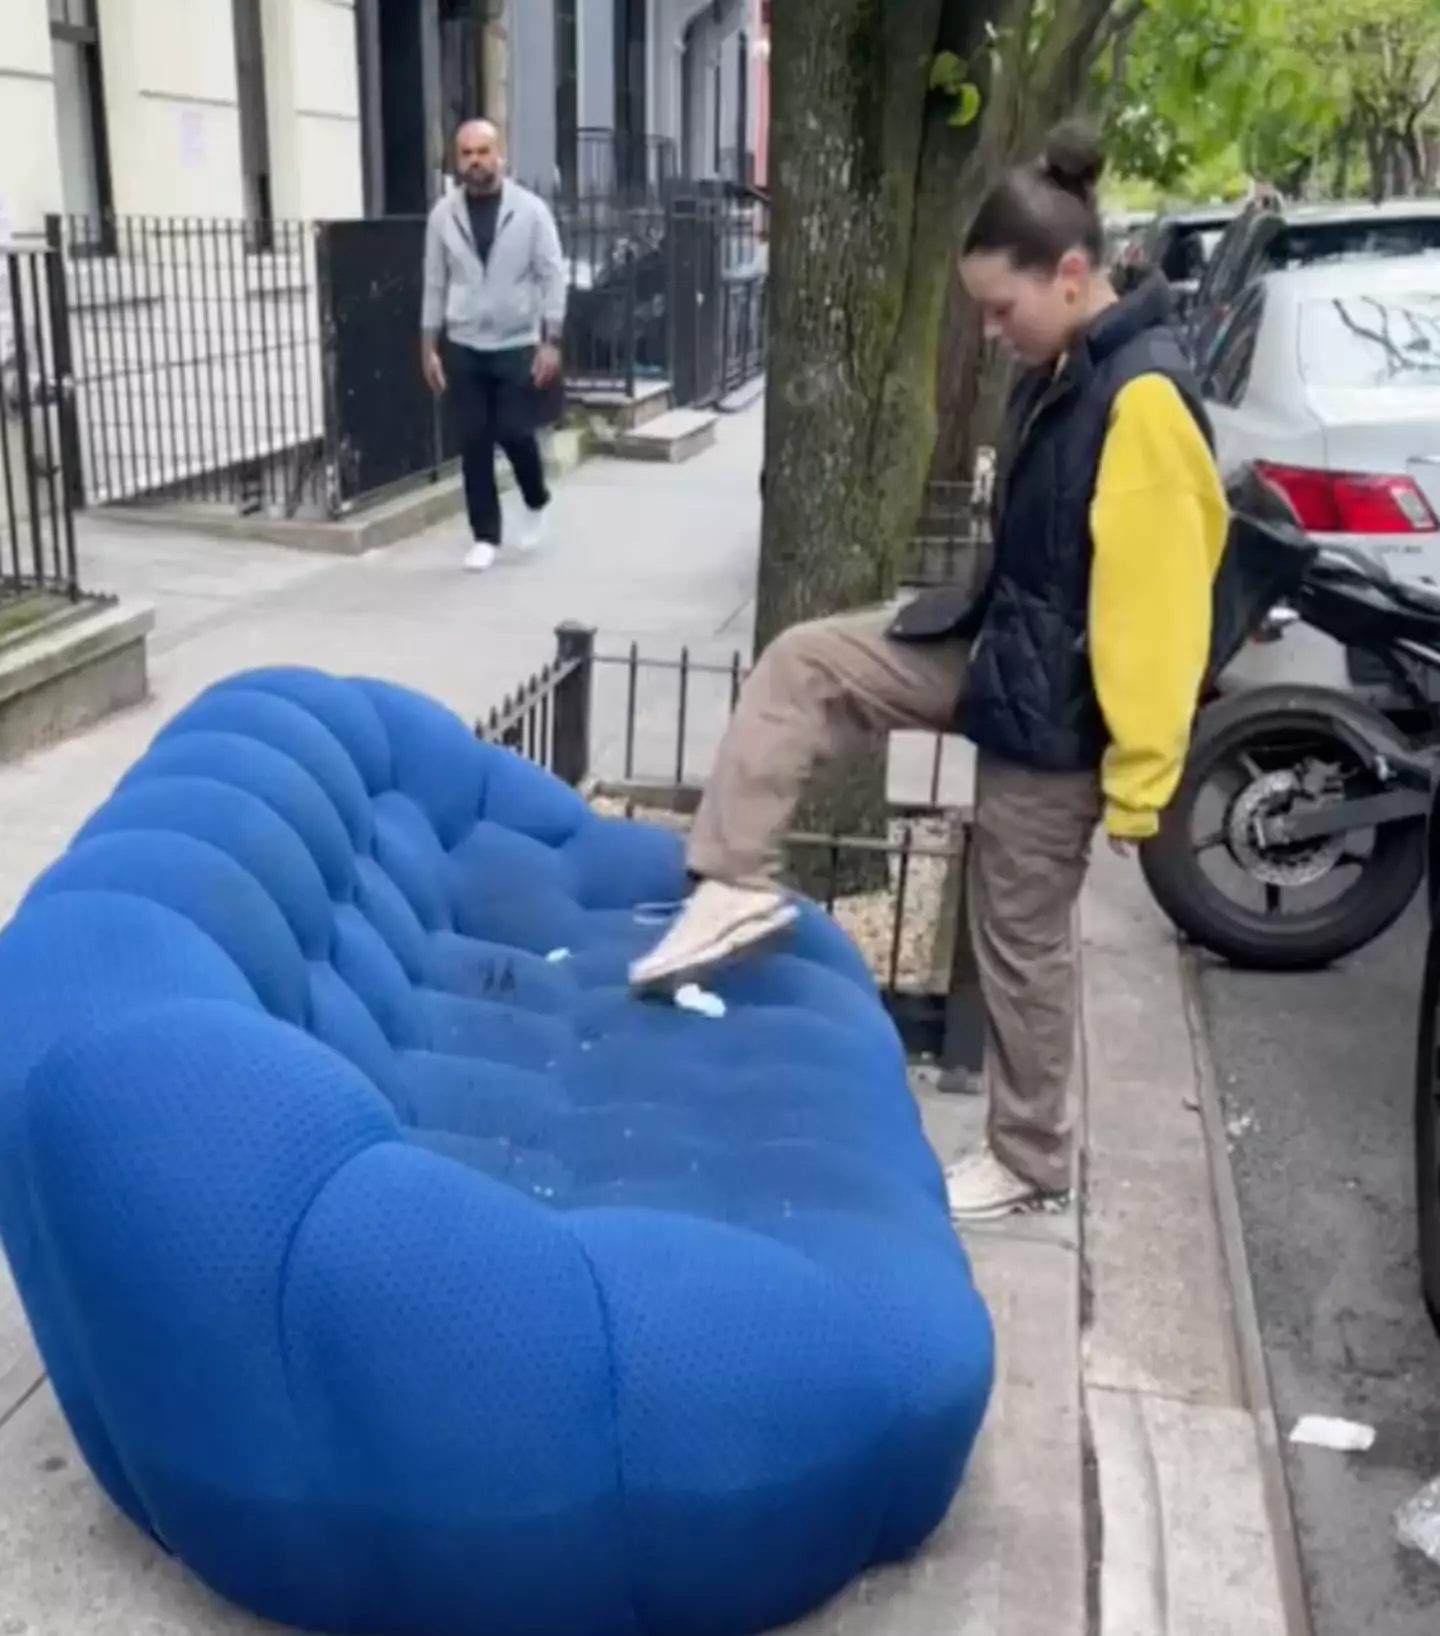 Amanda Joy found the couch in New York City.